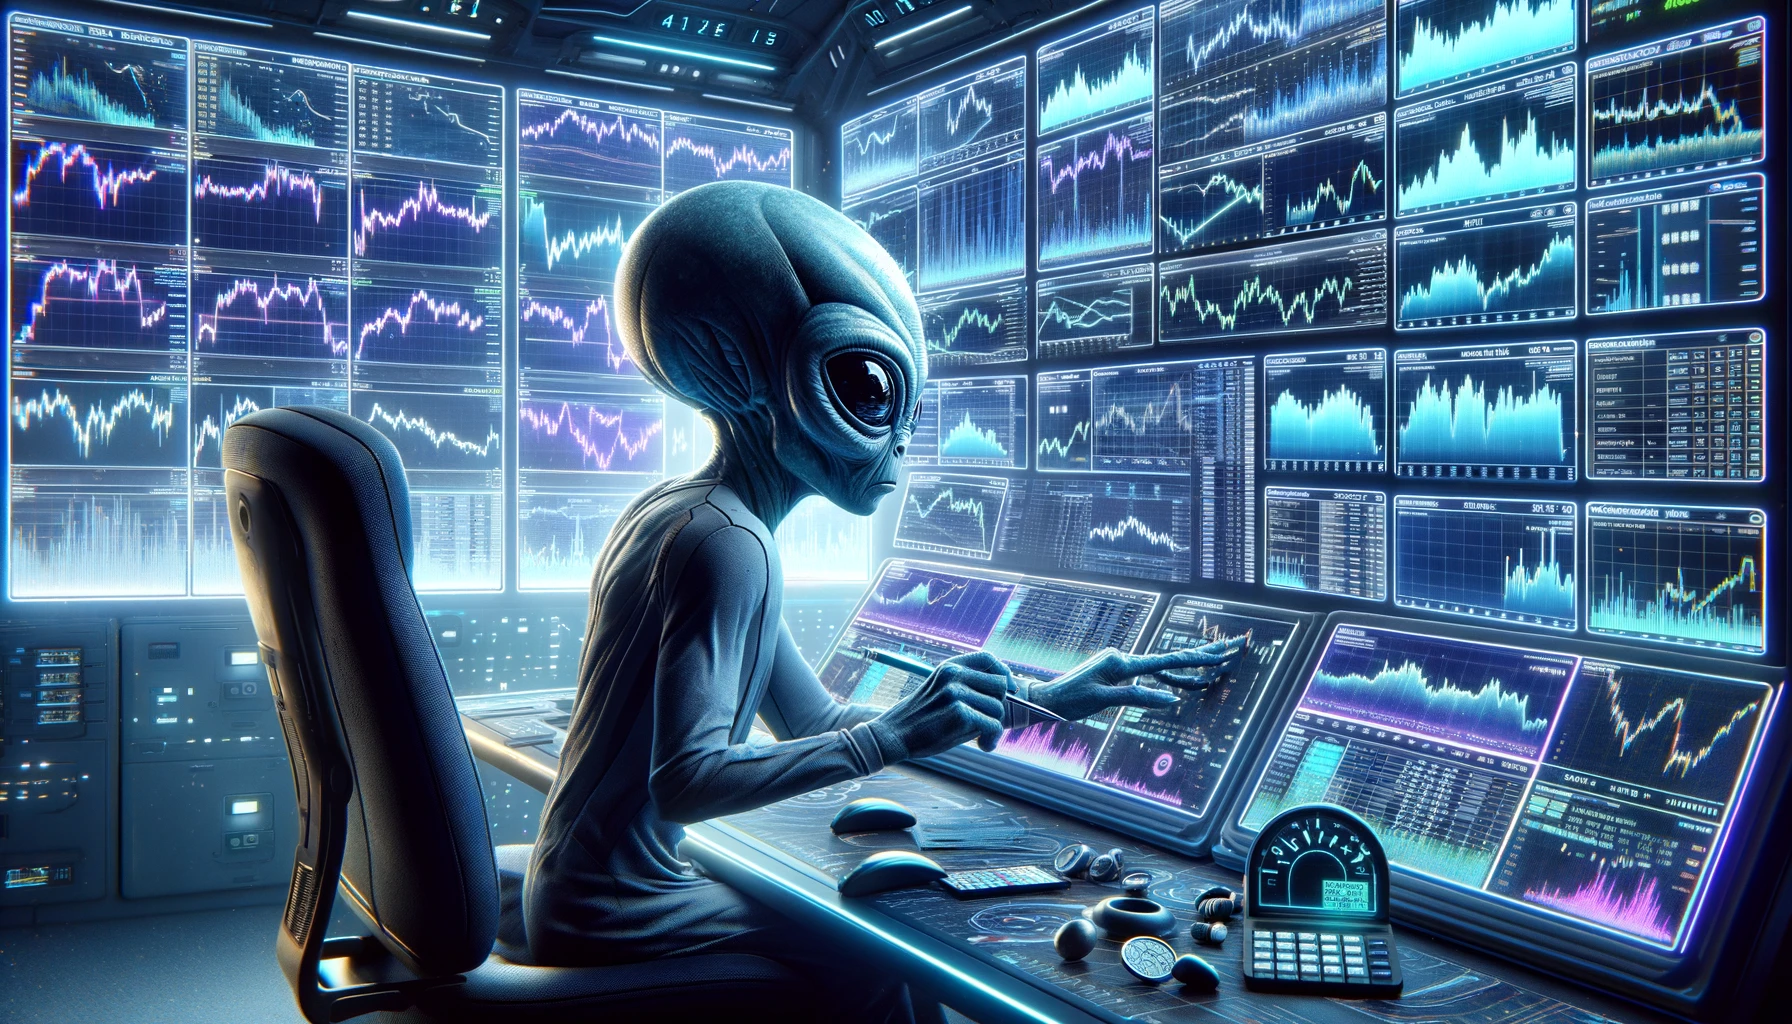 An-alien-character-performing-fundamental-analysis-on-several-screens.-The-scene-is-set-in-a-high-tech-futuristic-environment-with-multiple-digital-screens